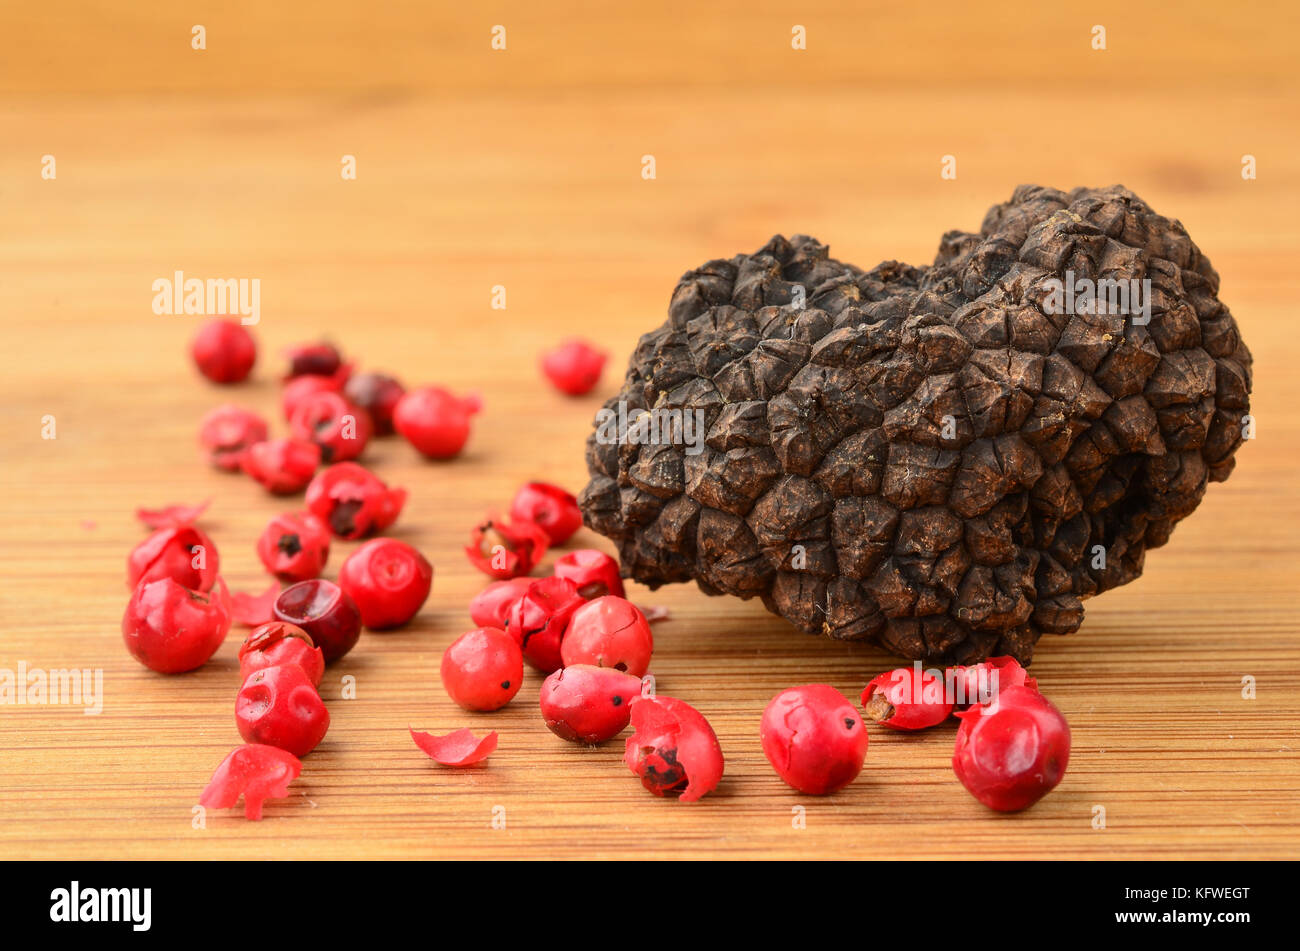 One piece of Black truffle, heart shaped, and grains of red pepper on bamboo wooden background, close up view Stock Photo